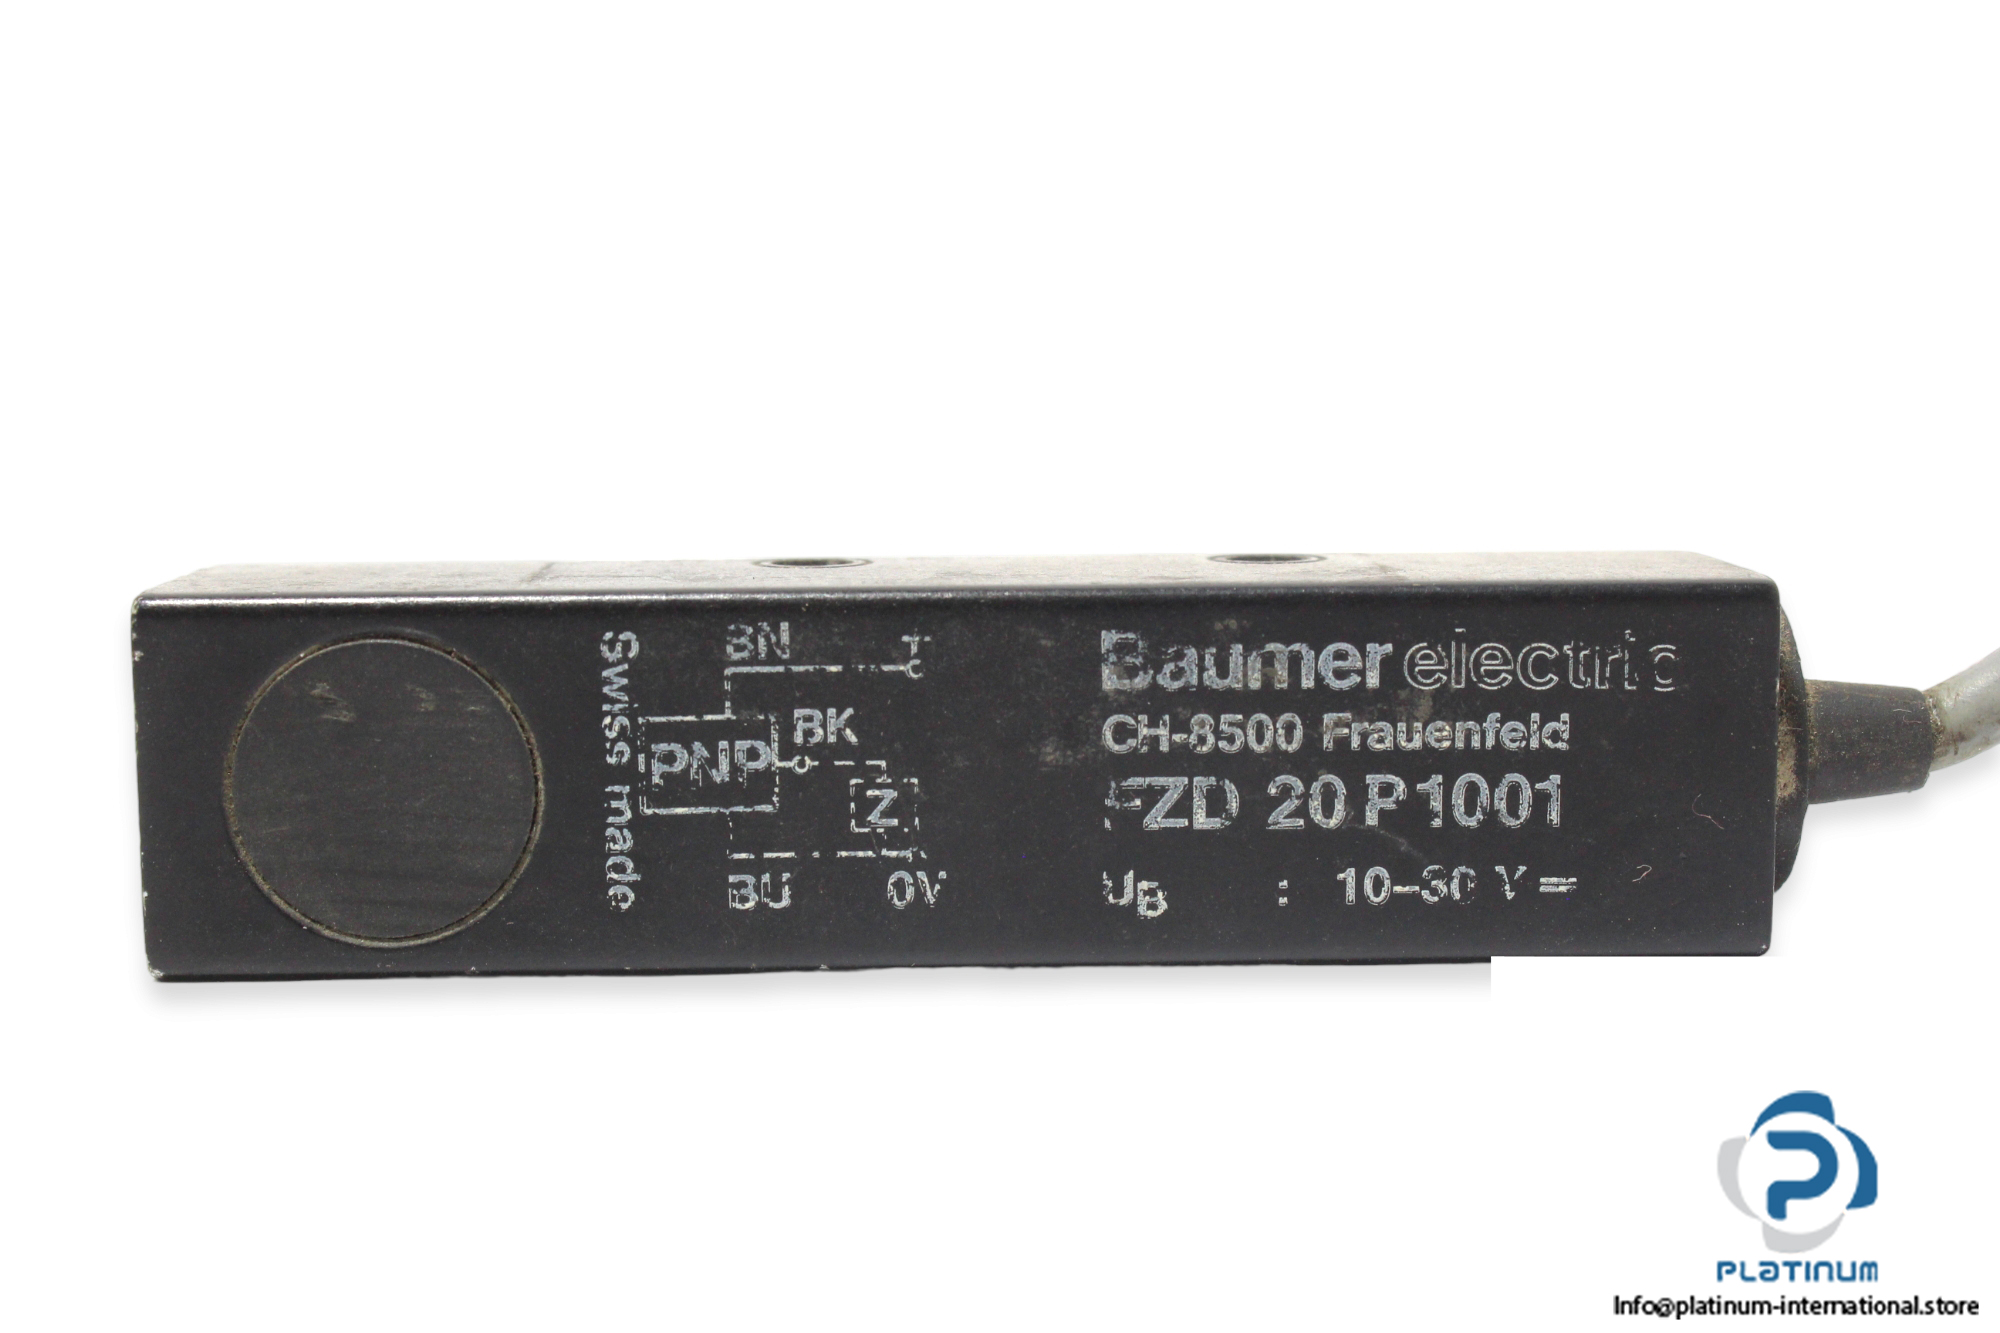 baumer-fzd-20p1001-diffuse-sensor-with-intensity-diffrence-2